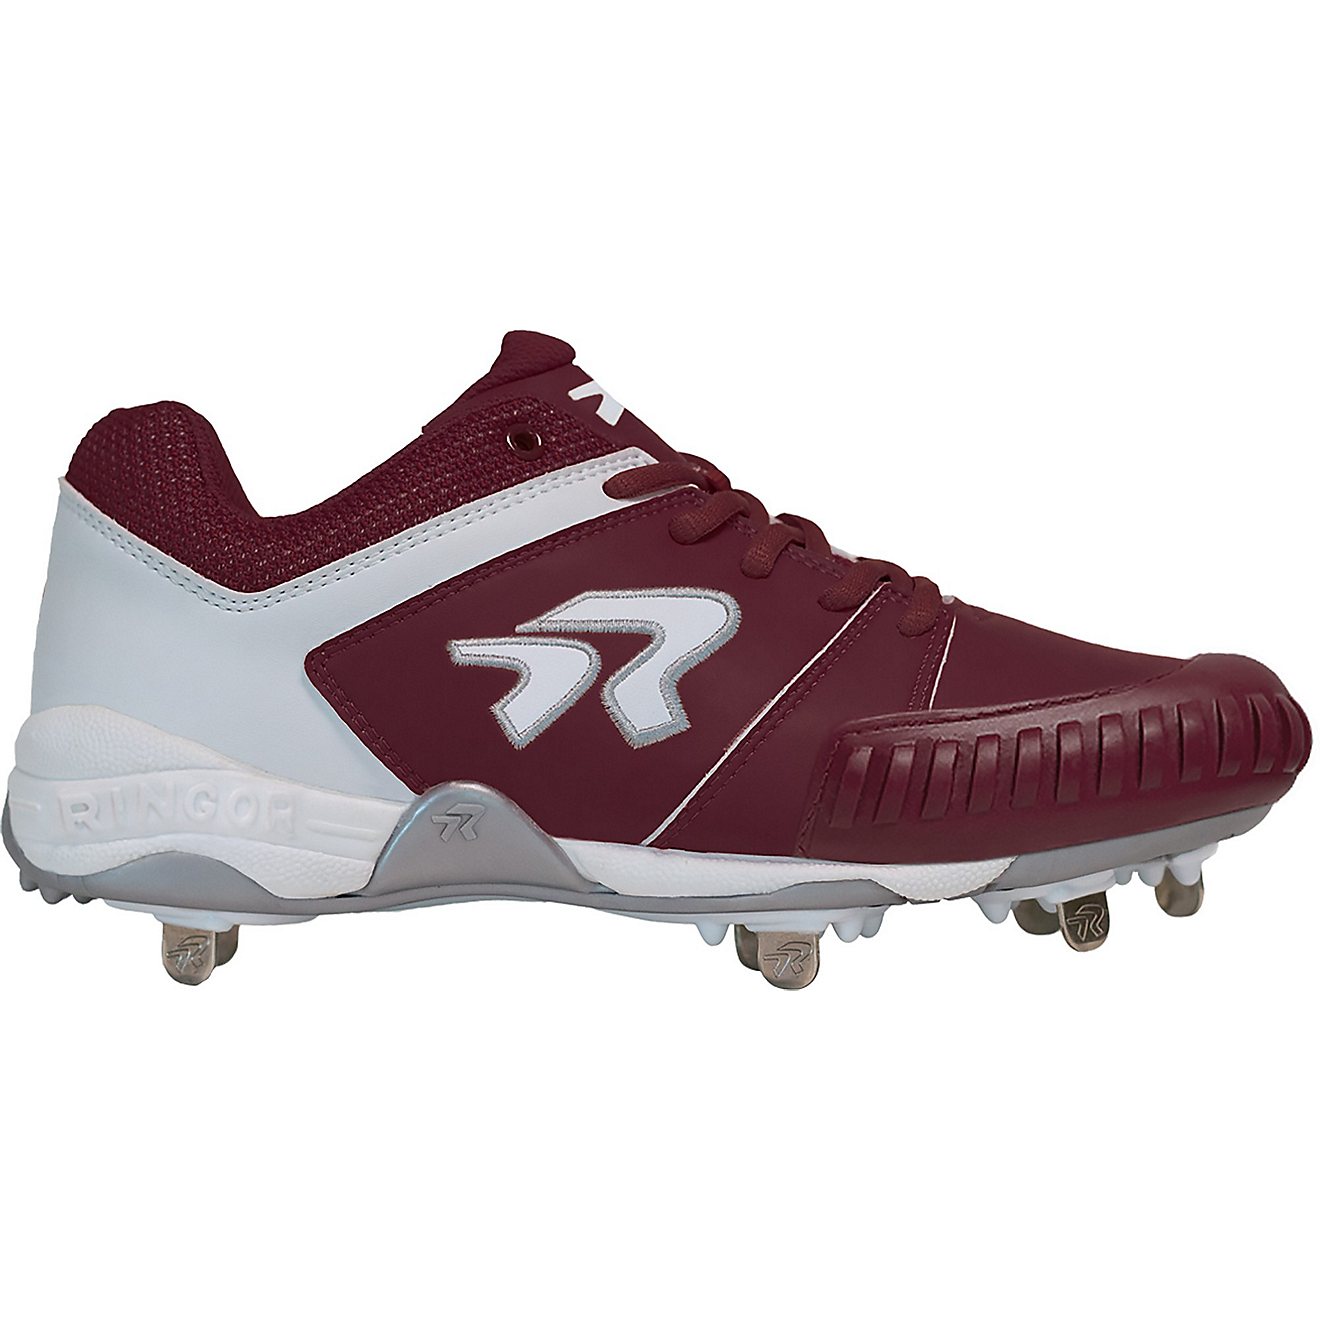 RIP-IT Women's Ringor Flite Pitching Toe Softball Spike Cleats                                                                   - view number 1